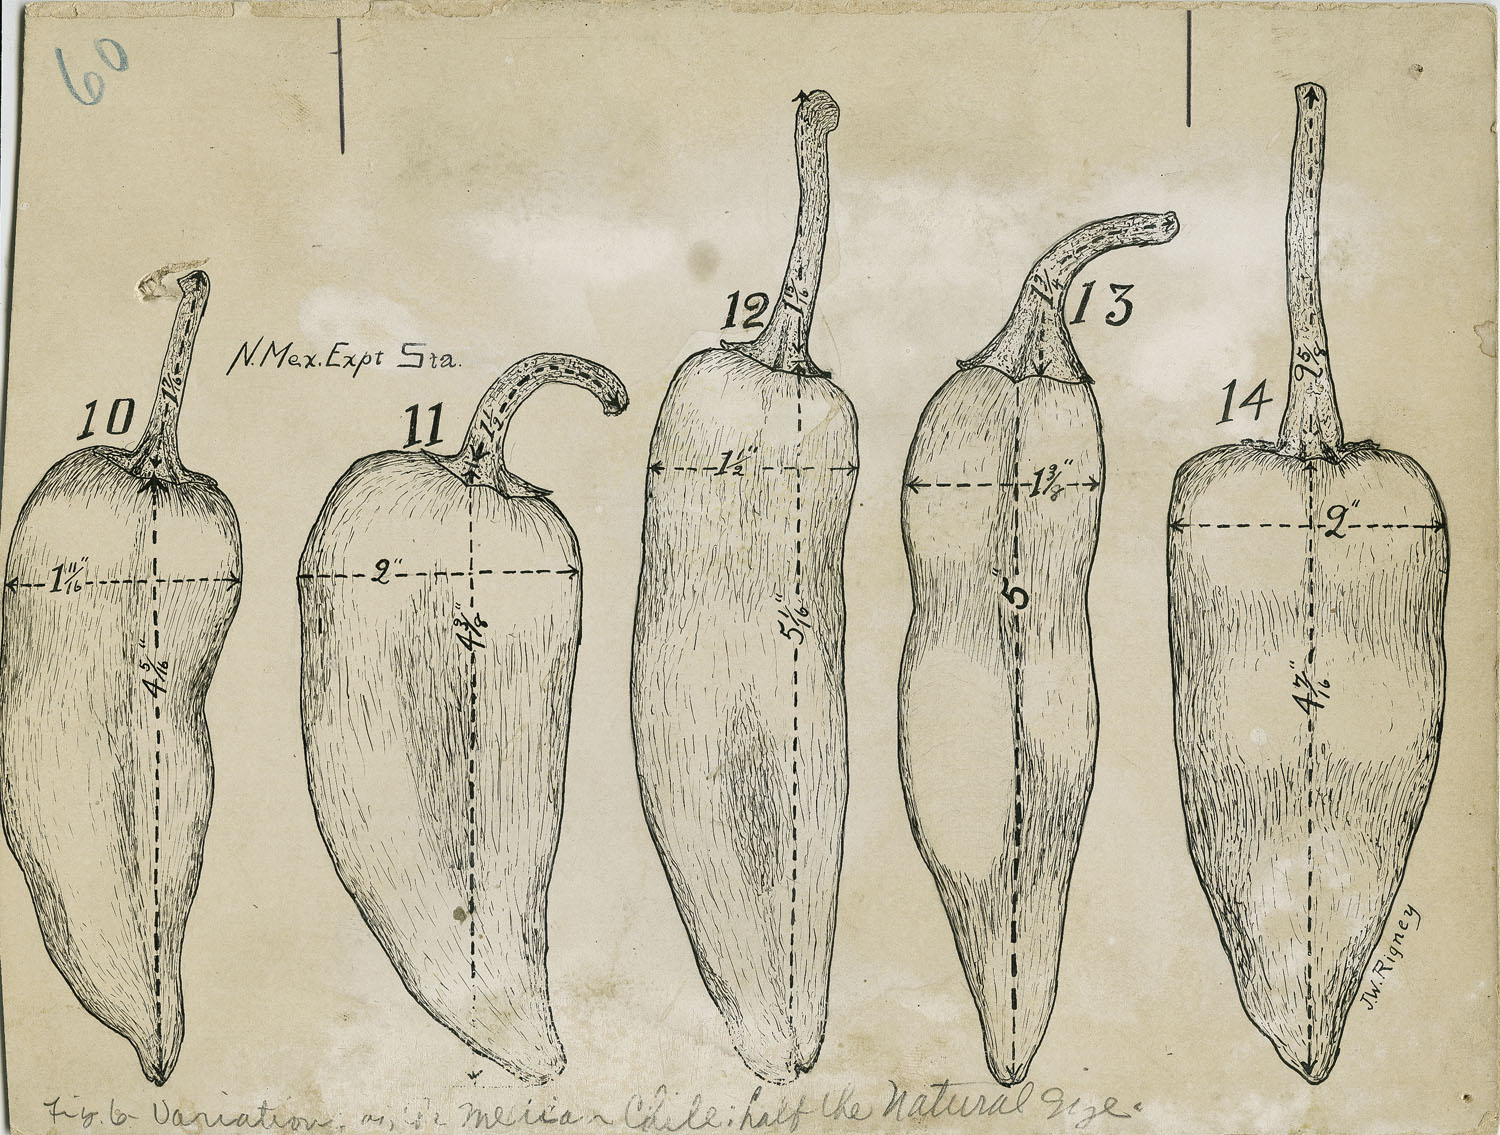 Drawings of variations of chile pods from New Mexico Experimental Station, New Mexico College of Agriculture and Mechanic Arts, drawn by J. W. Rigney